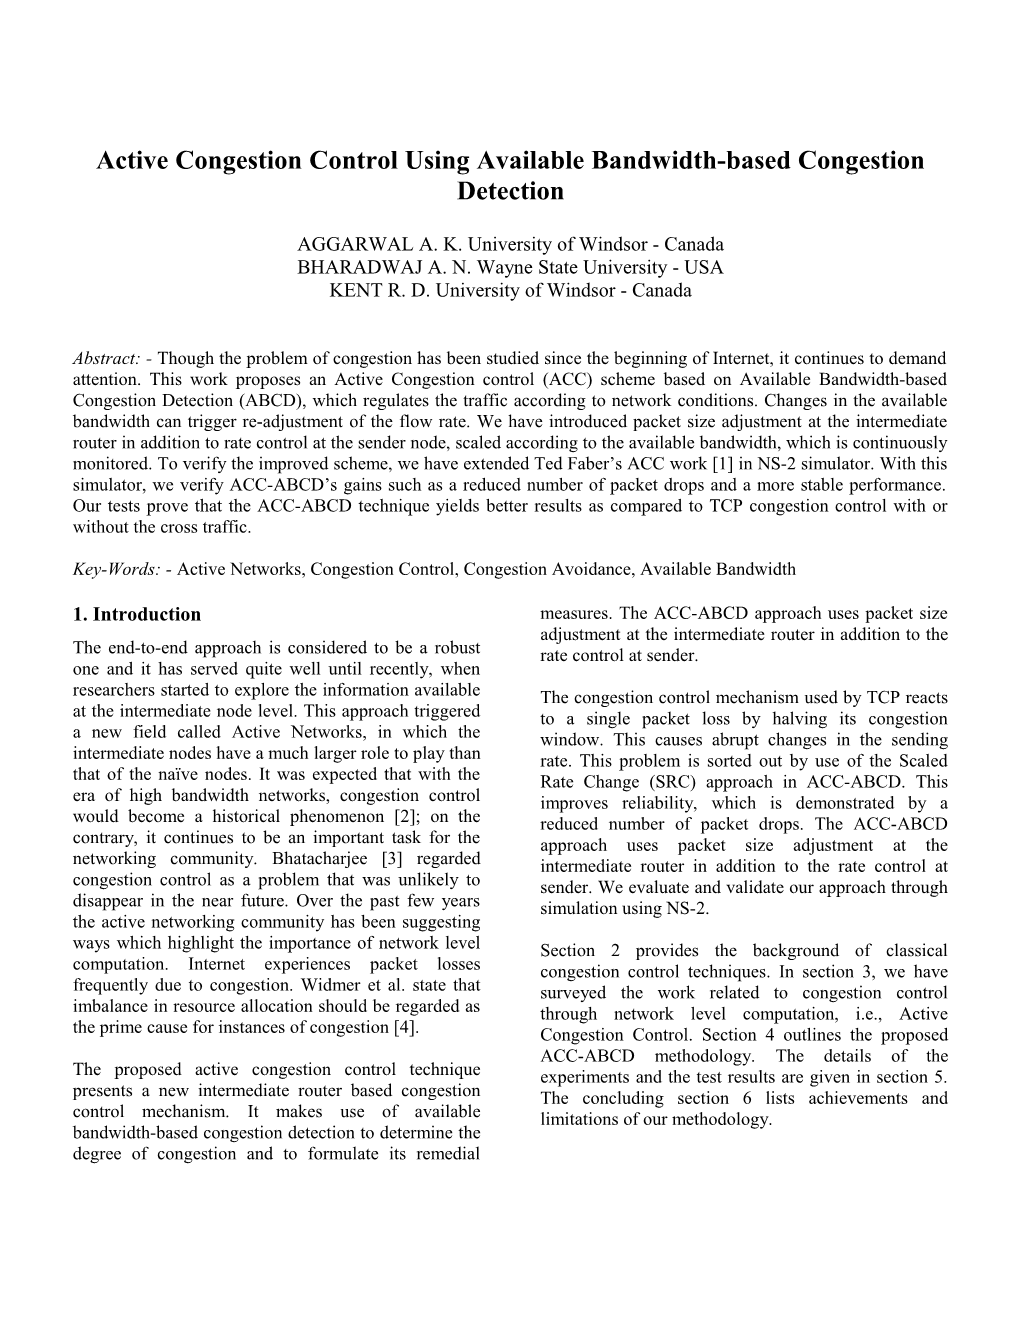 Active Congestion Control (ACC) Using Available Bandwidth-Based Congestion Detection (ABCD)